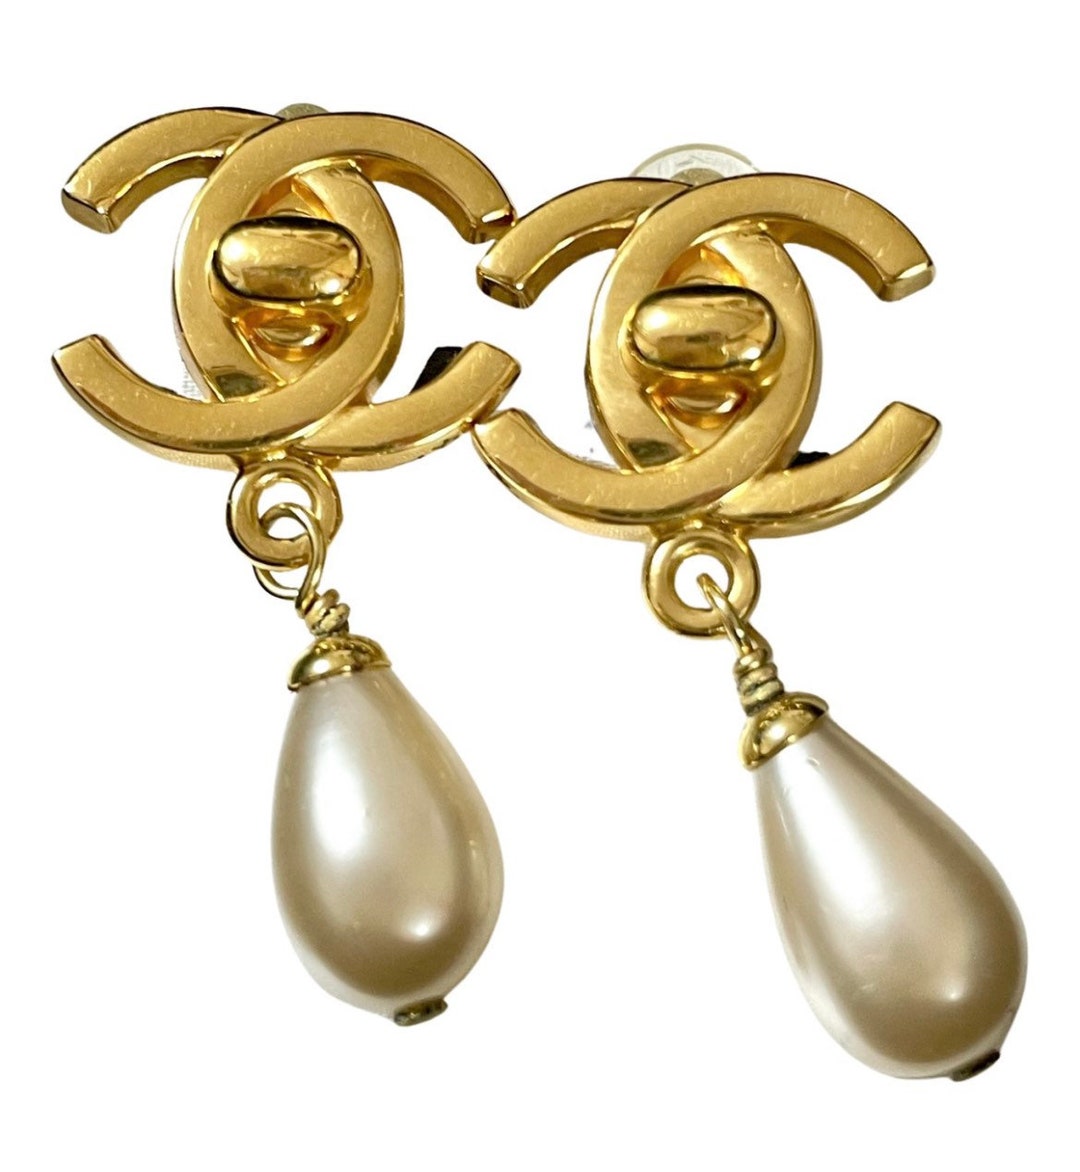 Vintage CHANEL teardrop faux pearl and turn-lock CC dangle earrings. Very  classic and popular jewelry. Coco mark earrings. 050406m1